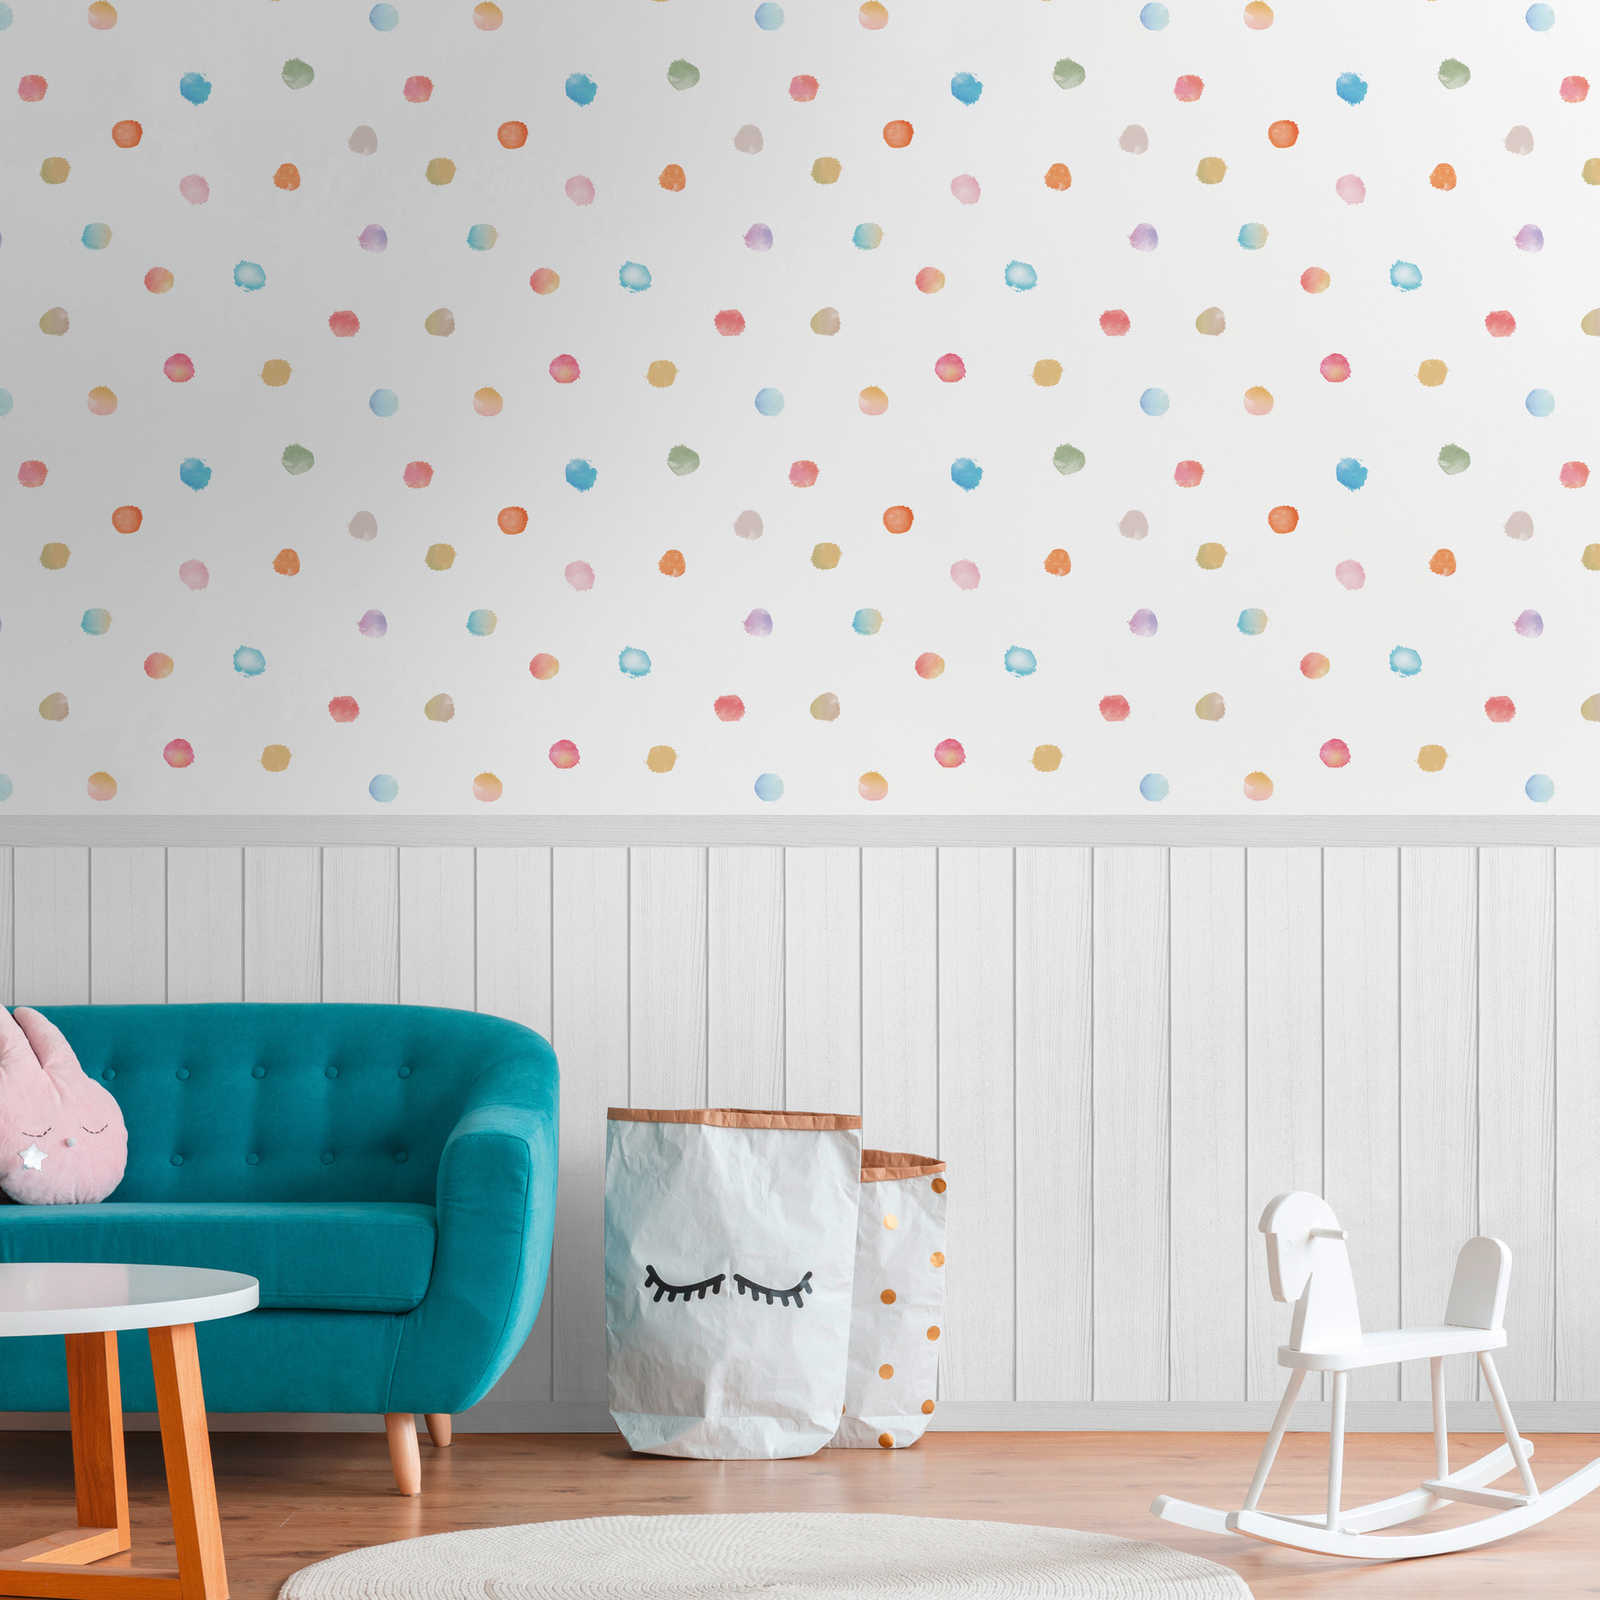 Non-woven motif wallpaper with wood-effect plinth border and dot pattern - white, grey, colourful
